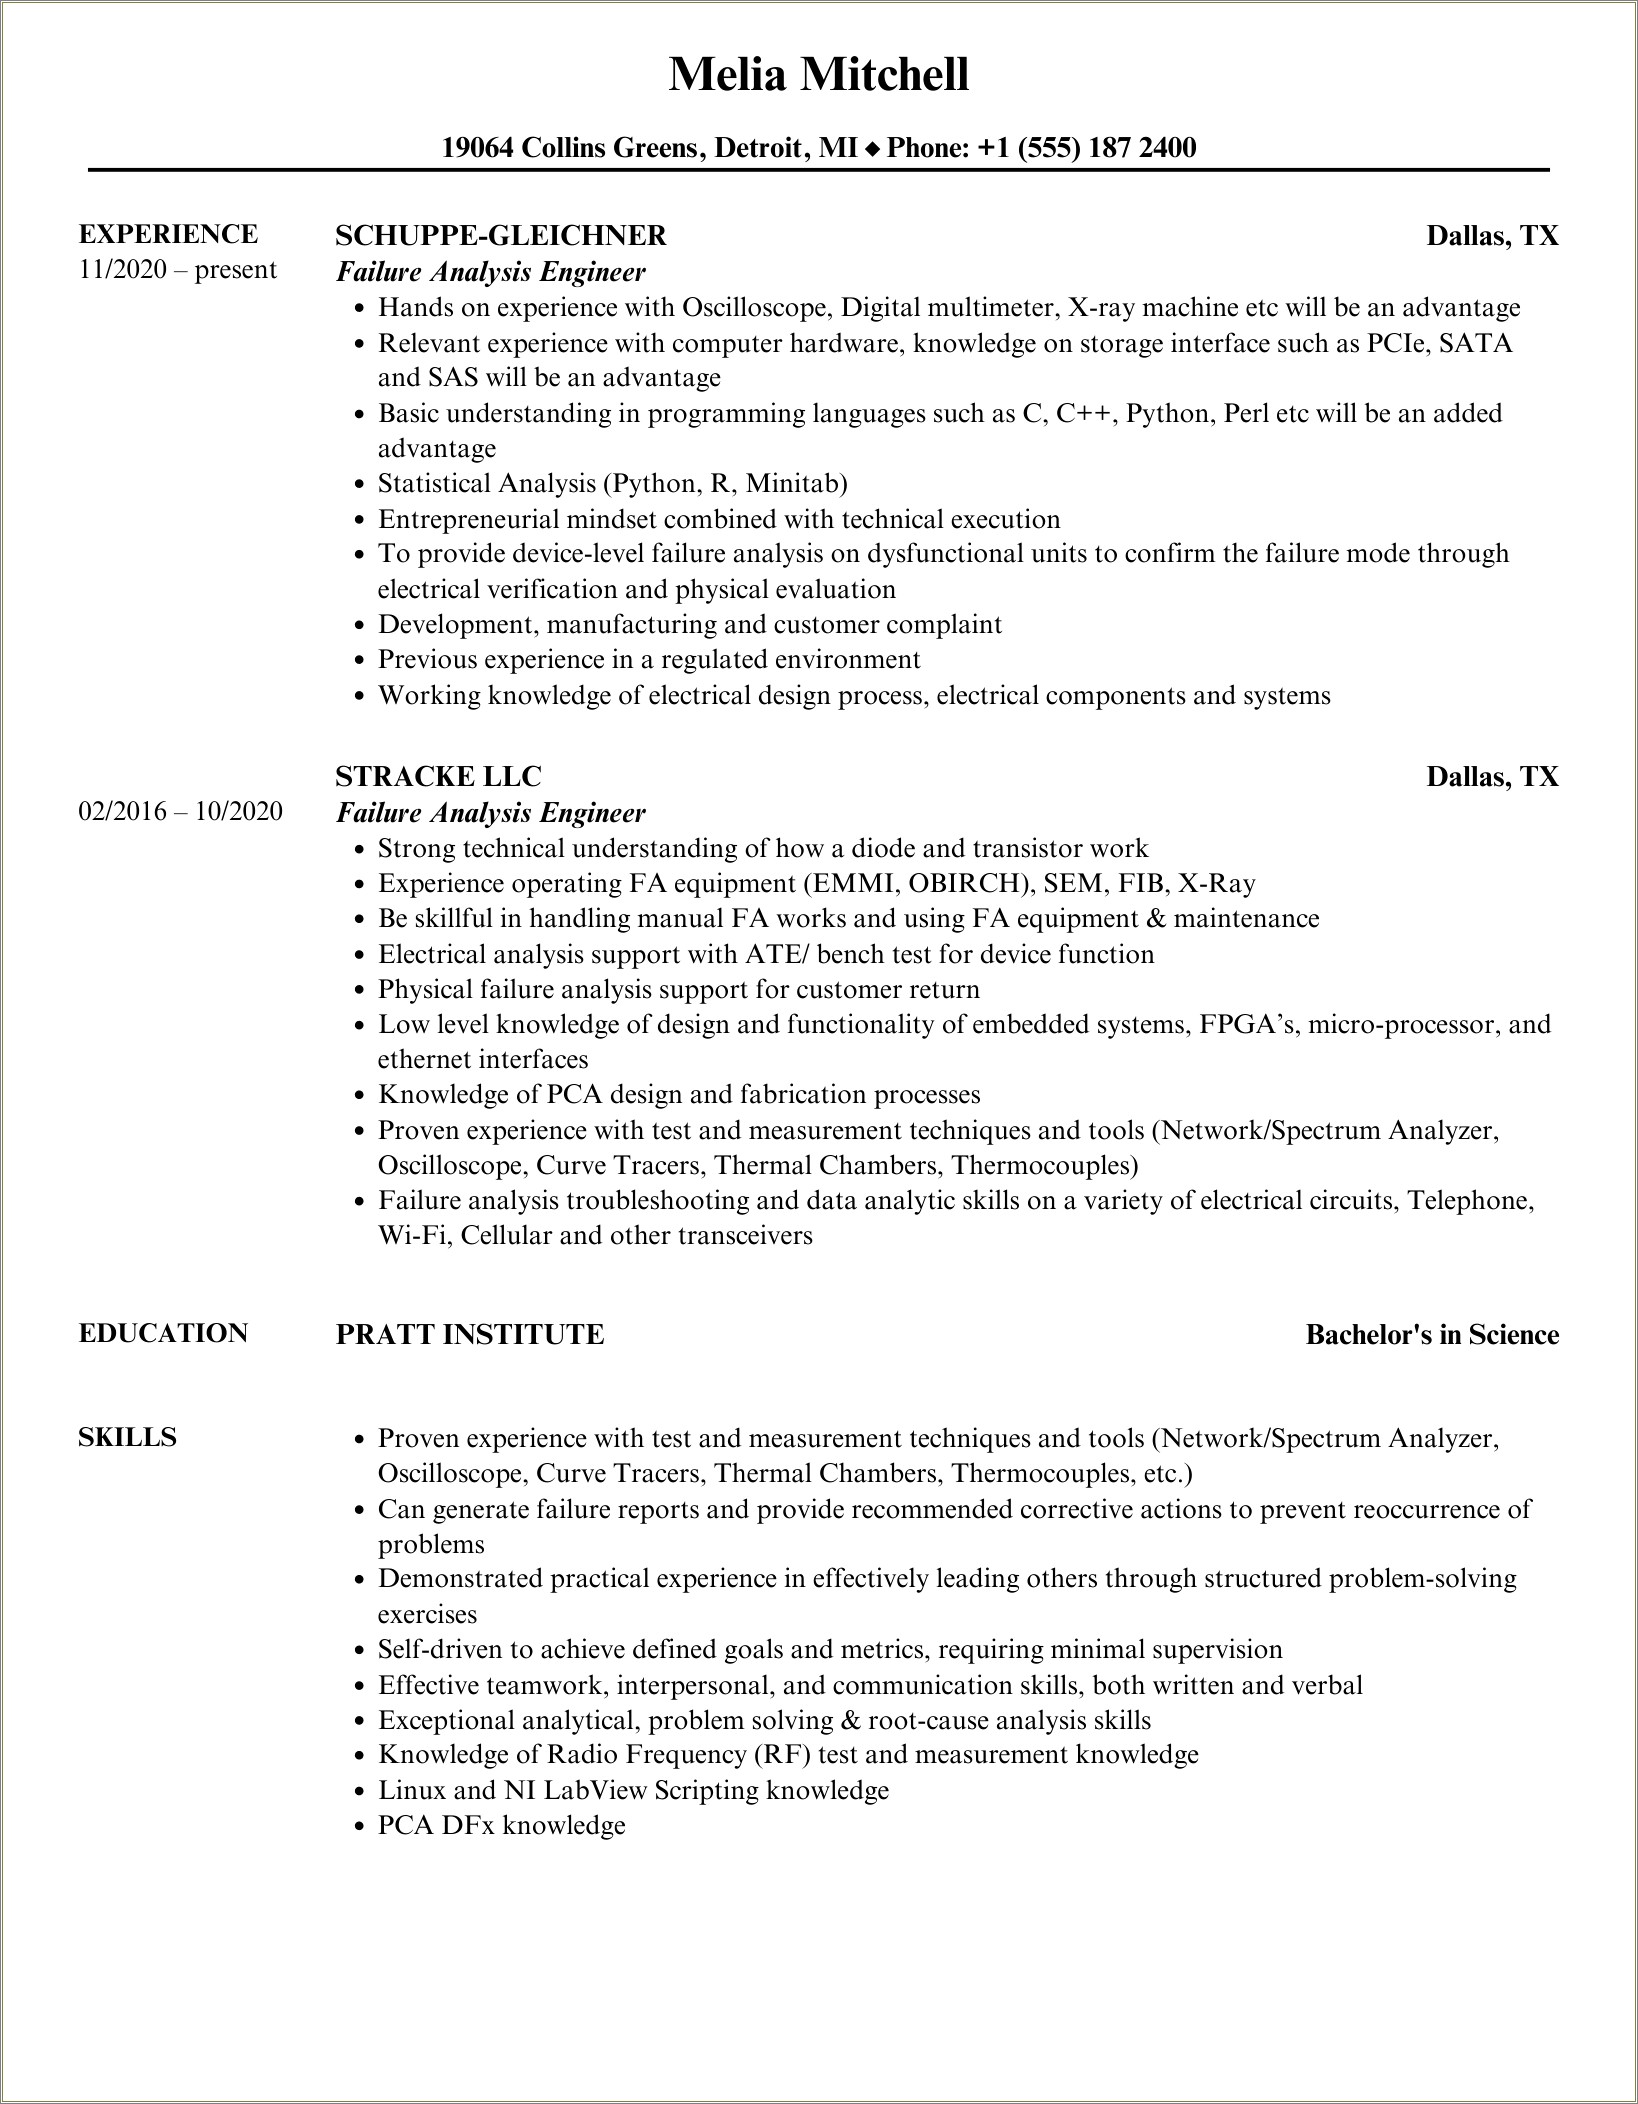 Resume Examples With Fmea Ppap Dvp&r Experience